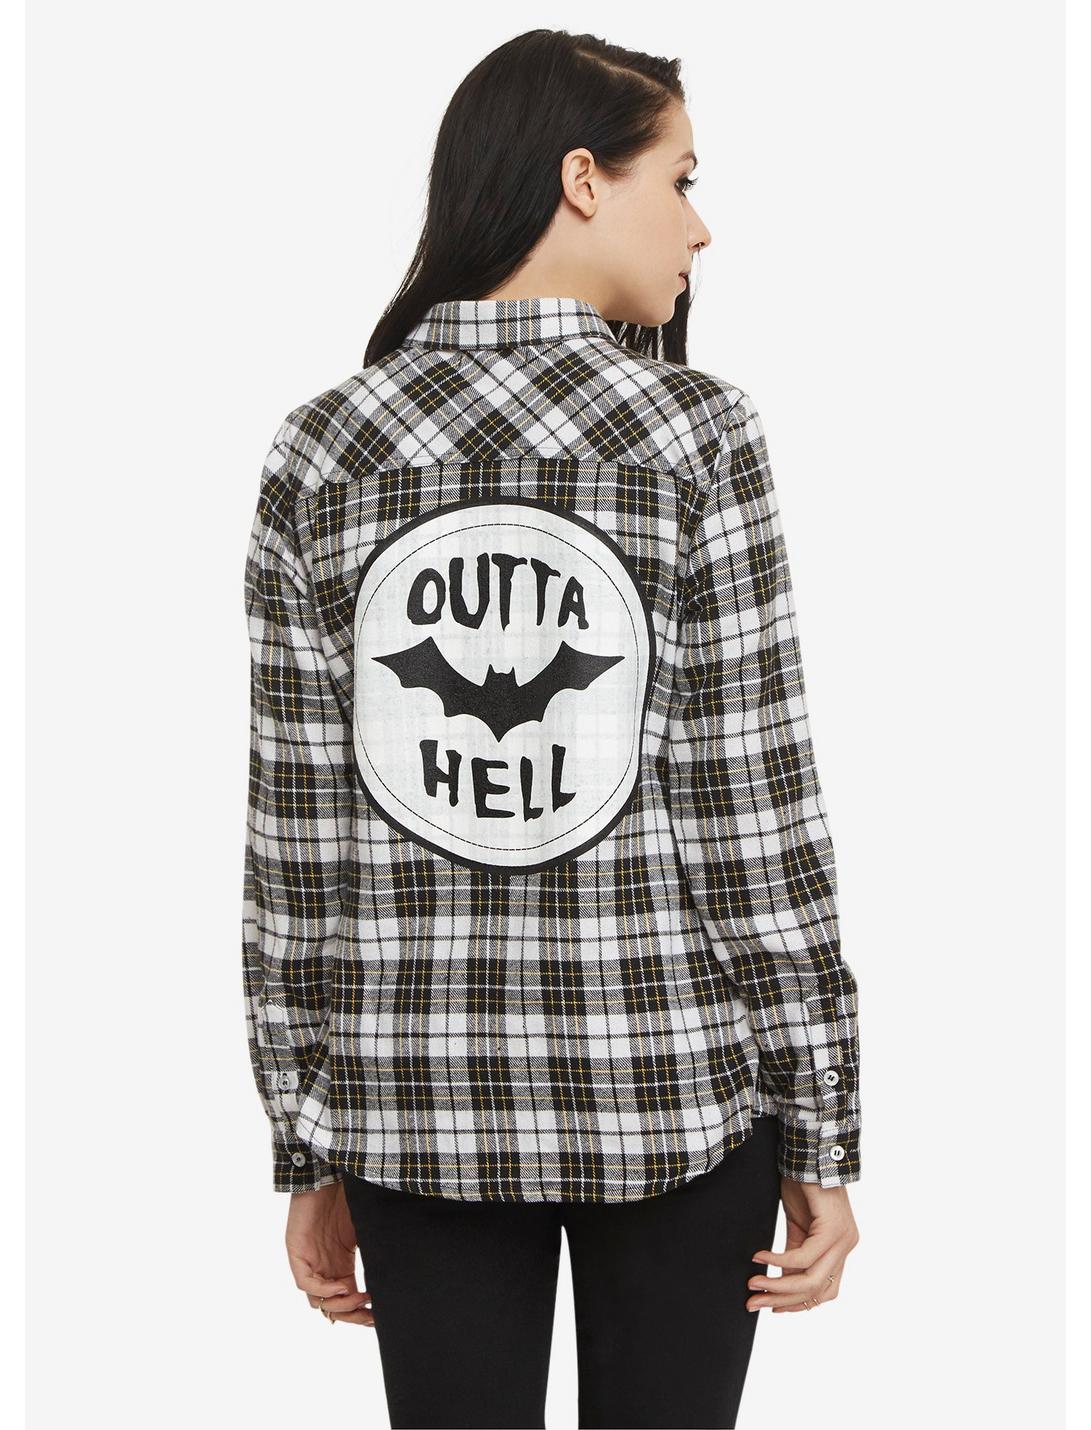 Bat Outta Hell Flannel Top, MULTI, hi-res